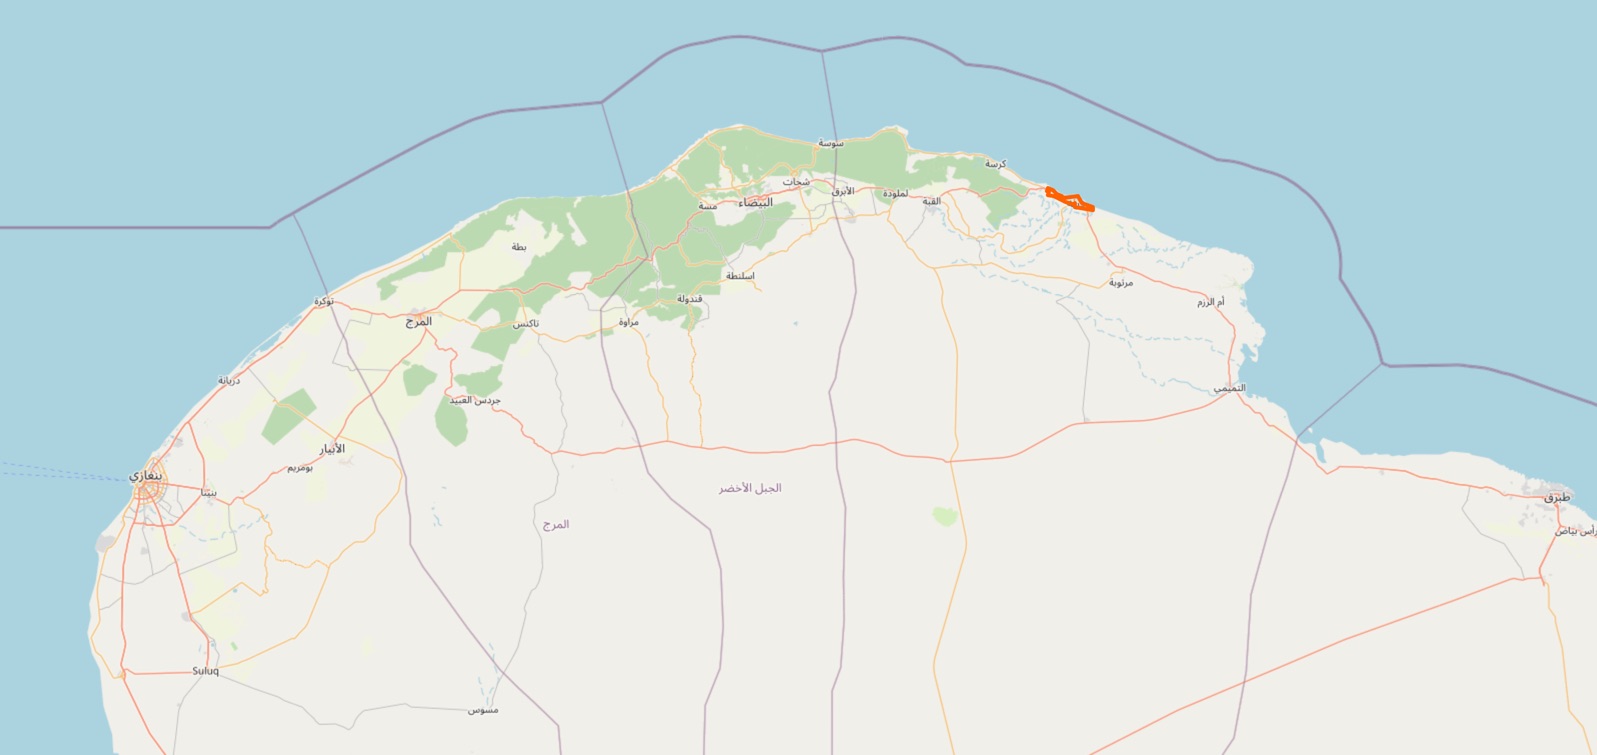 Map of eastern Libya from OpenStreetMap showing the Derna area highlighted in red